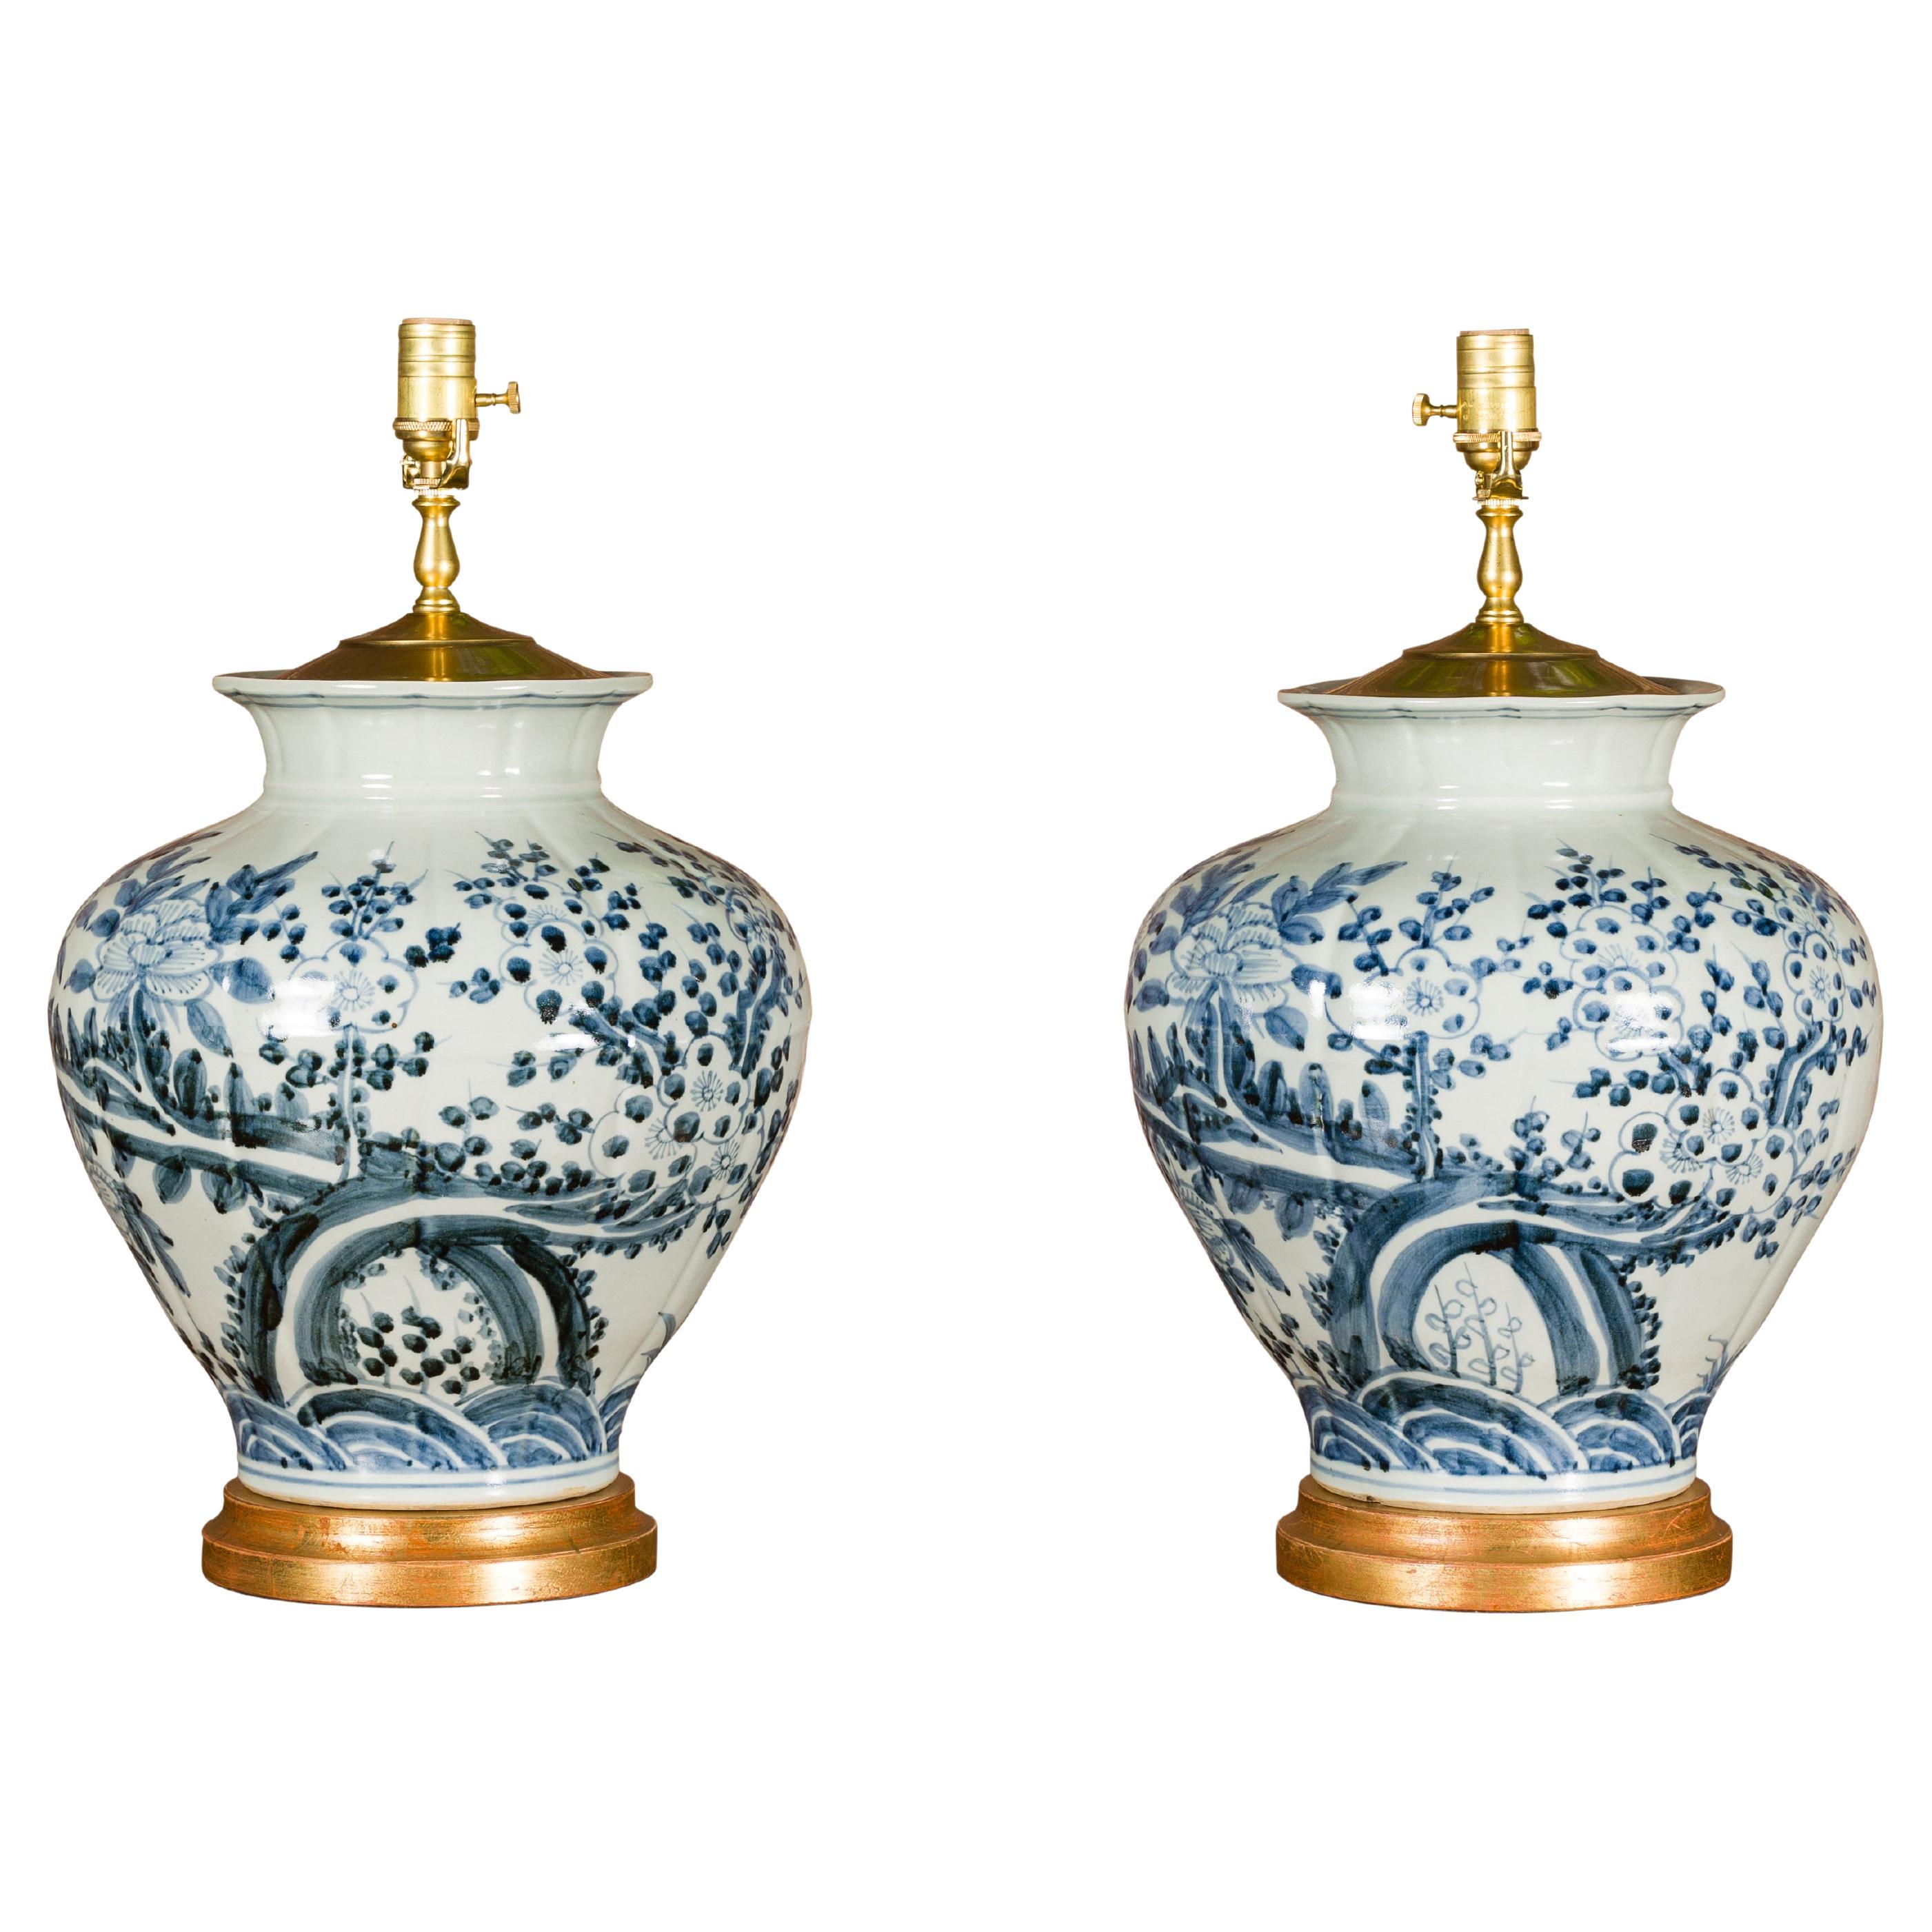 Asian Blue and White Porcelain Table Lamps with Blooming Trees, a Pair